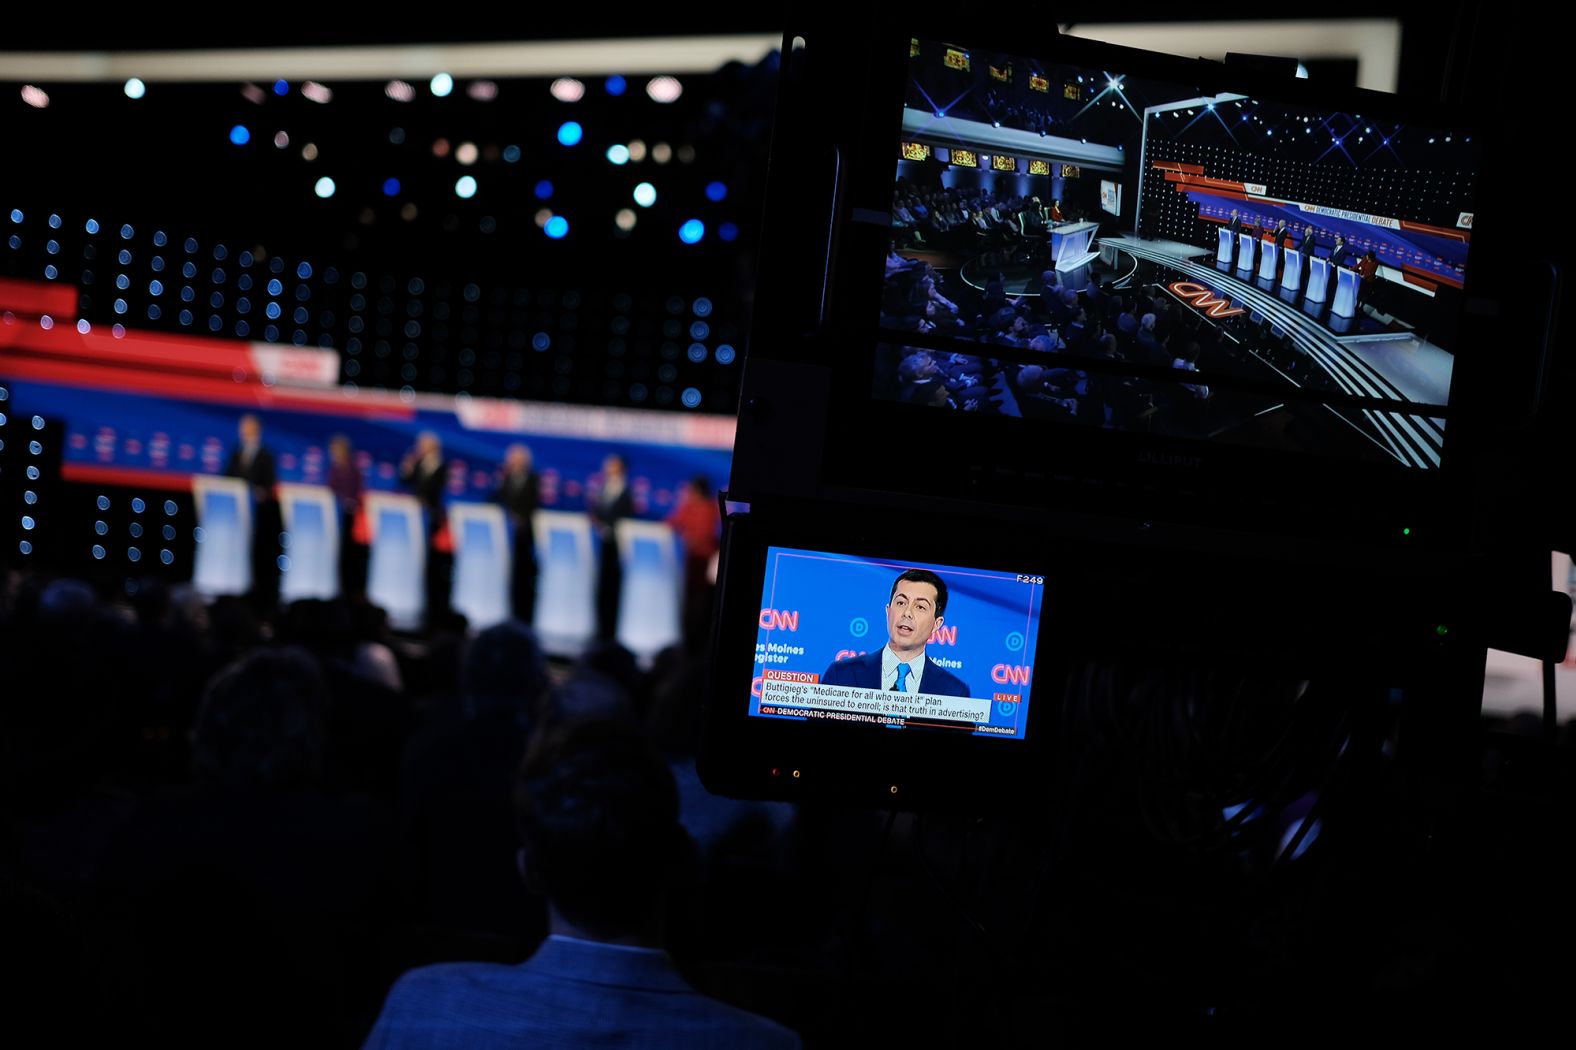 Buttigieg is seen on a screen at the debate venue. "If you're used to voting for the other party but right now cannot look your kids in the eye and explain this President to them, join me," he said in his closing statement.